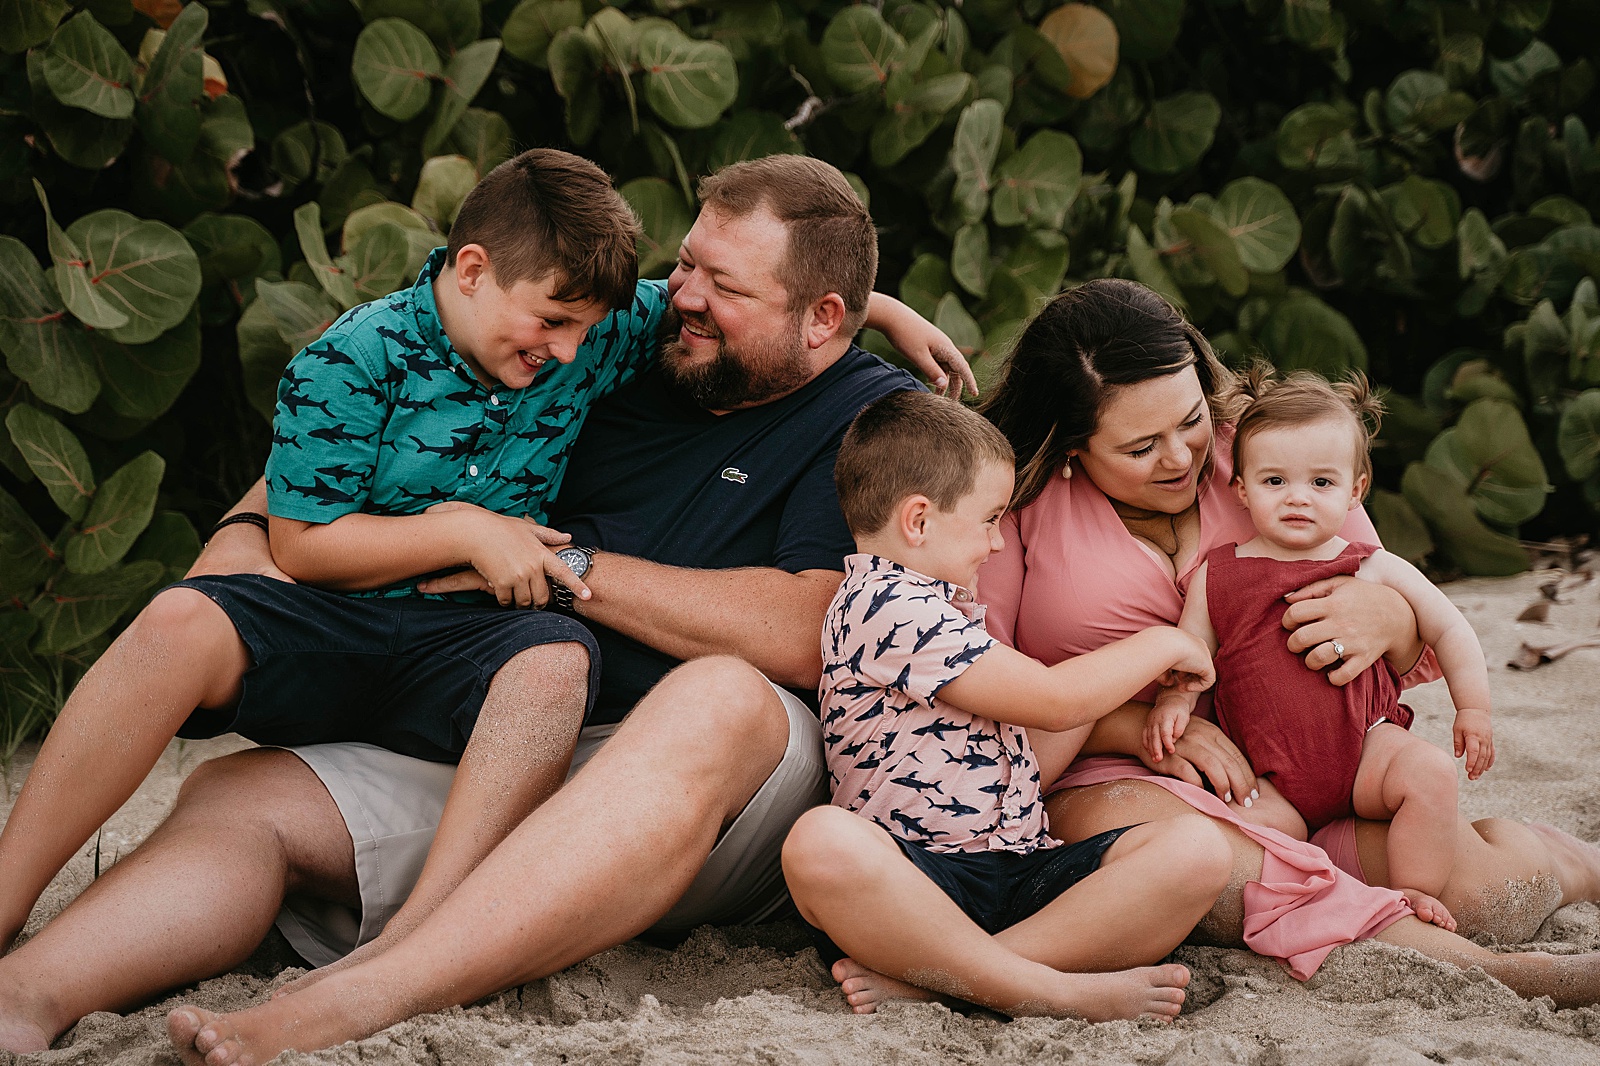 Palm Beach Family Session captured by South Florida Lifestyle Photographer, Krystal Capone Photography